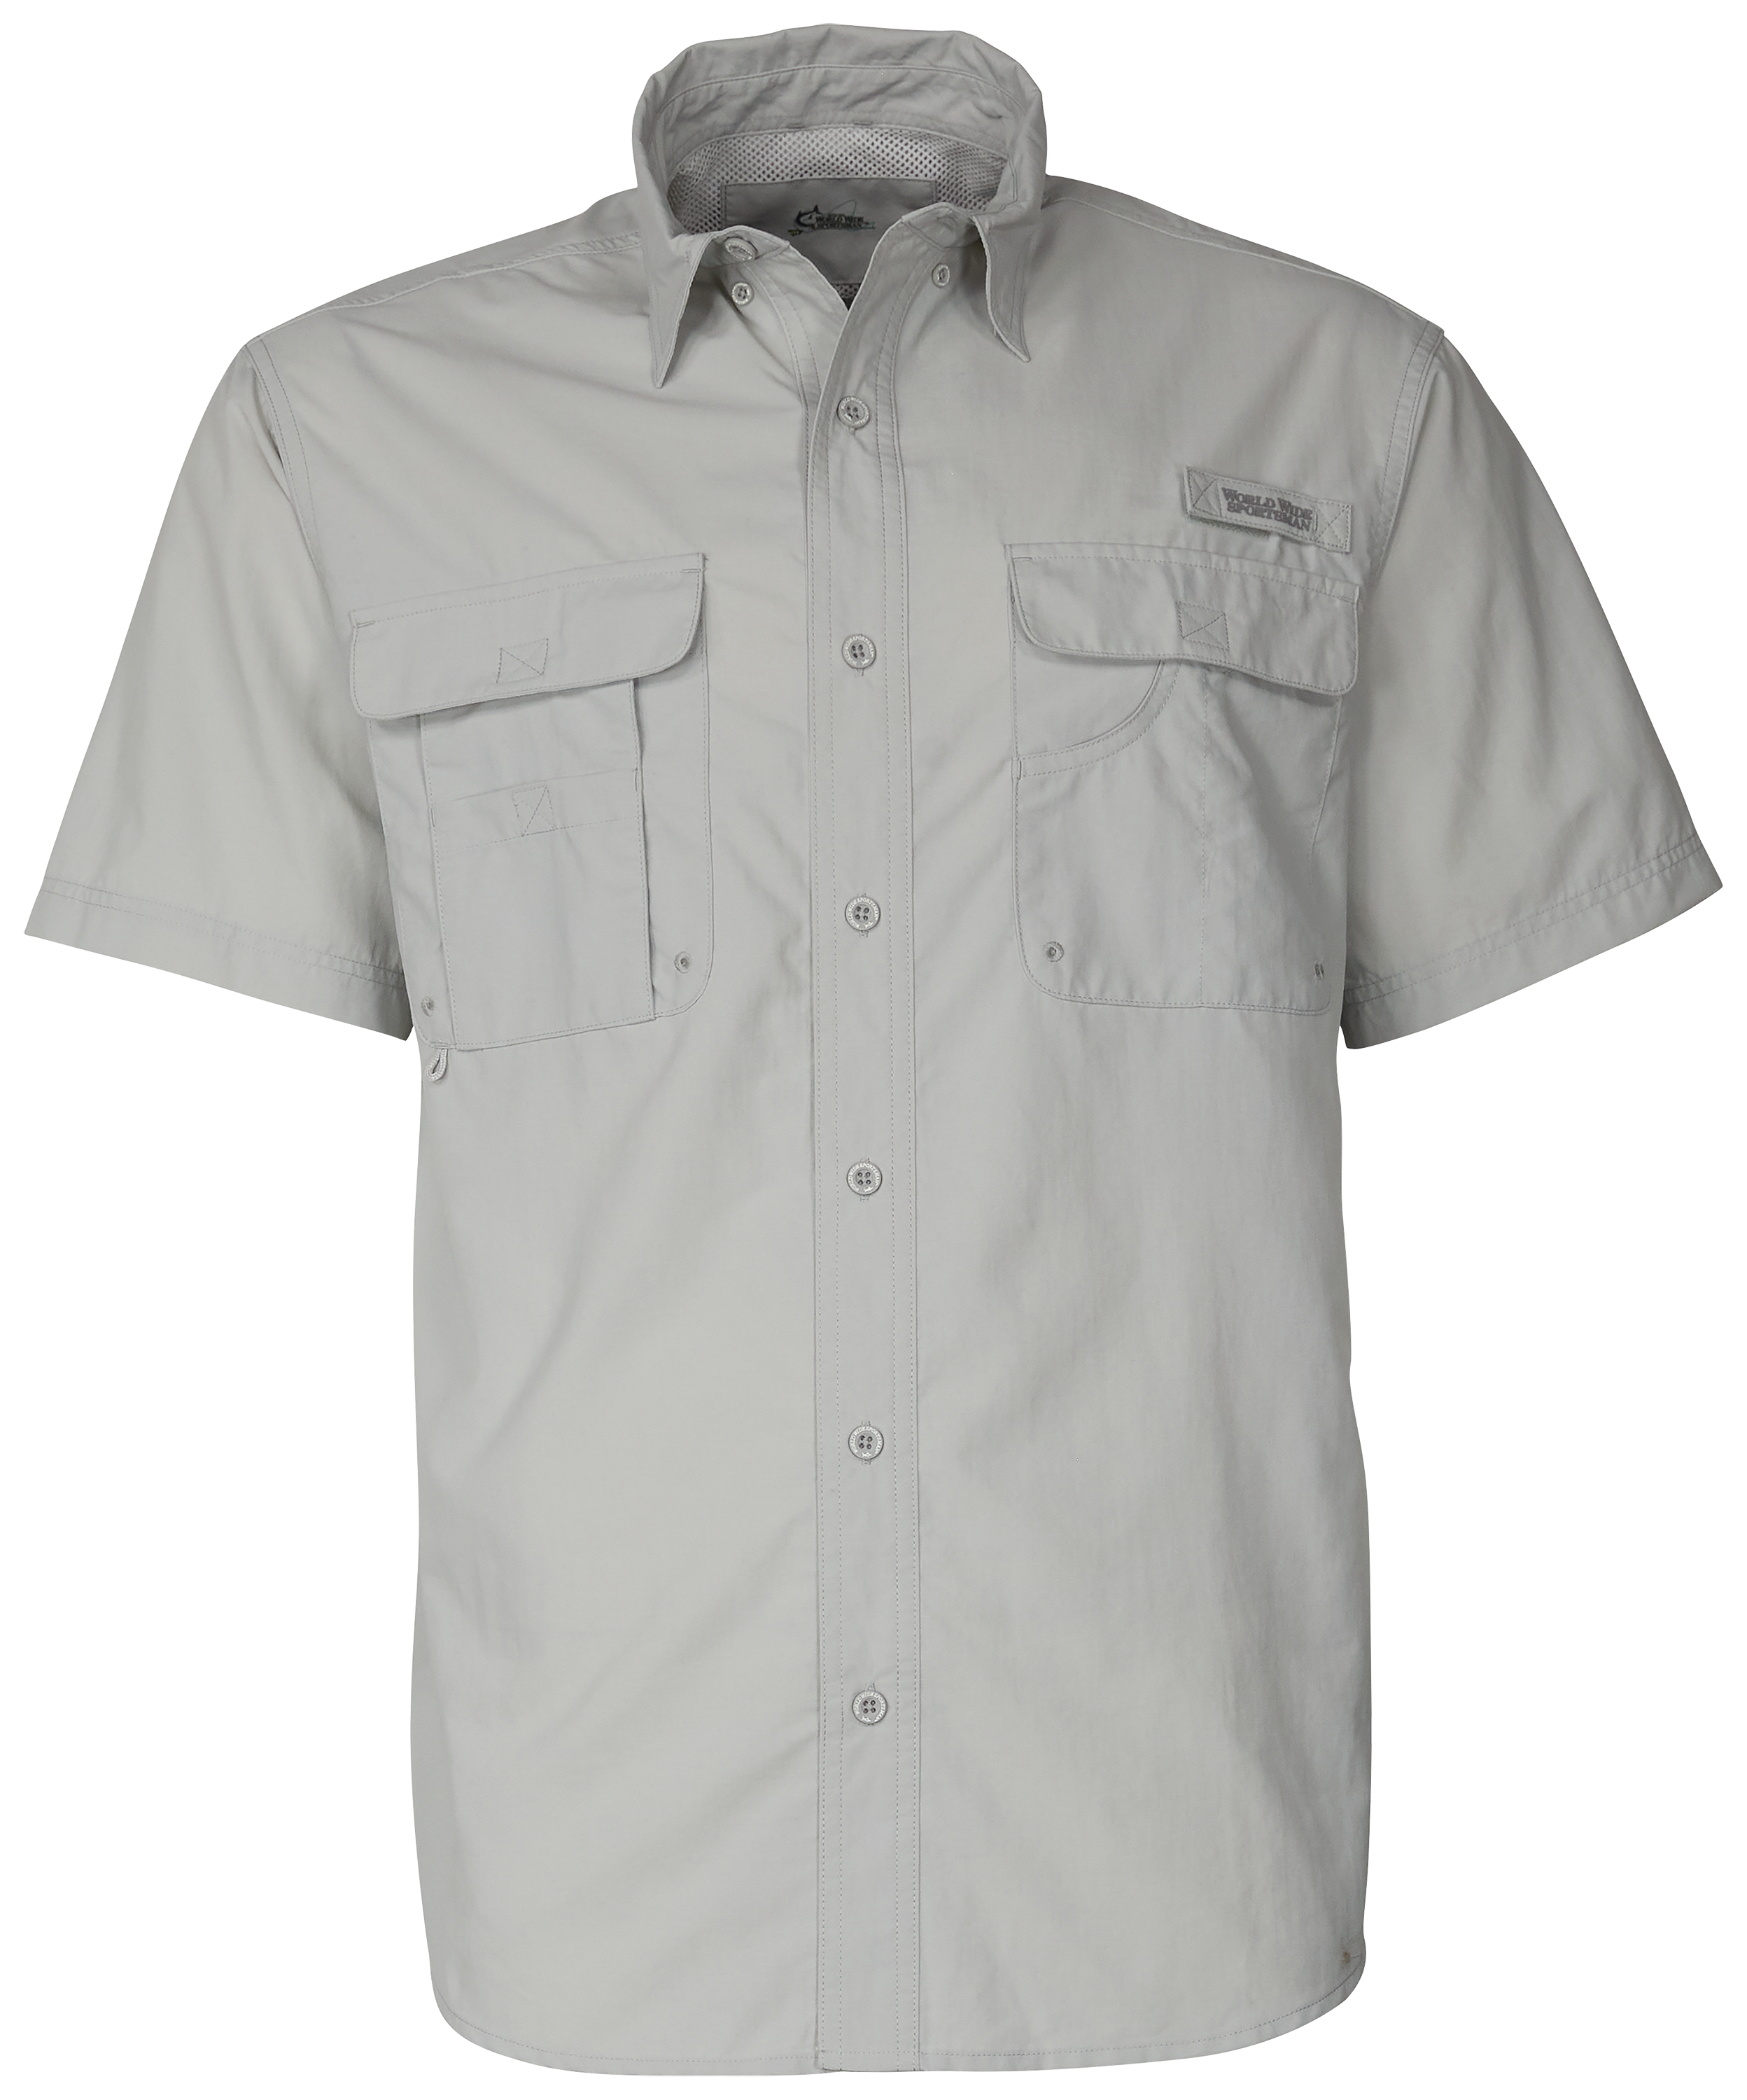 World Wide Sportsman Recycled-Nylon Angler 2.0 Short-Sleeve Button-Down Shirt for Men - High Rise - XL